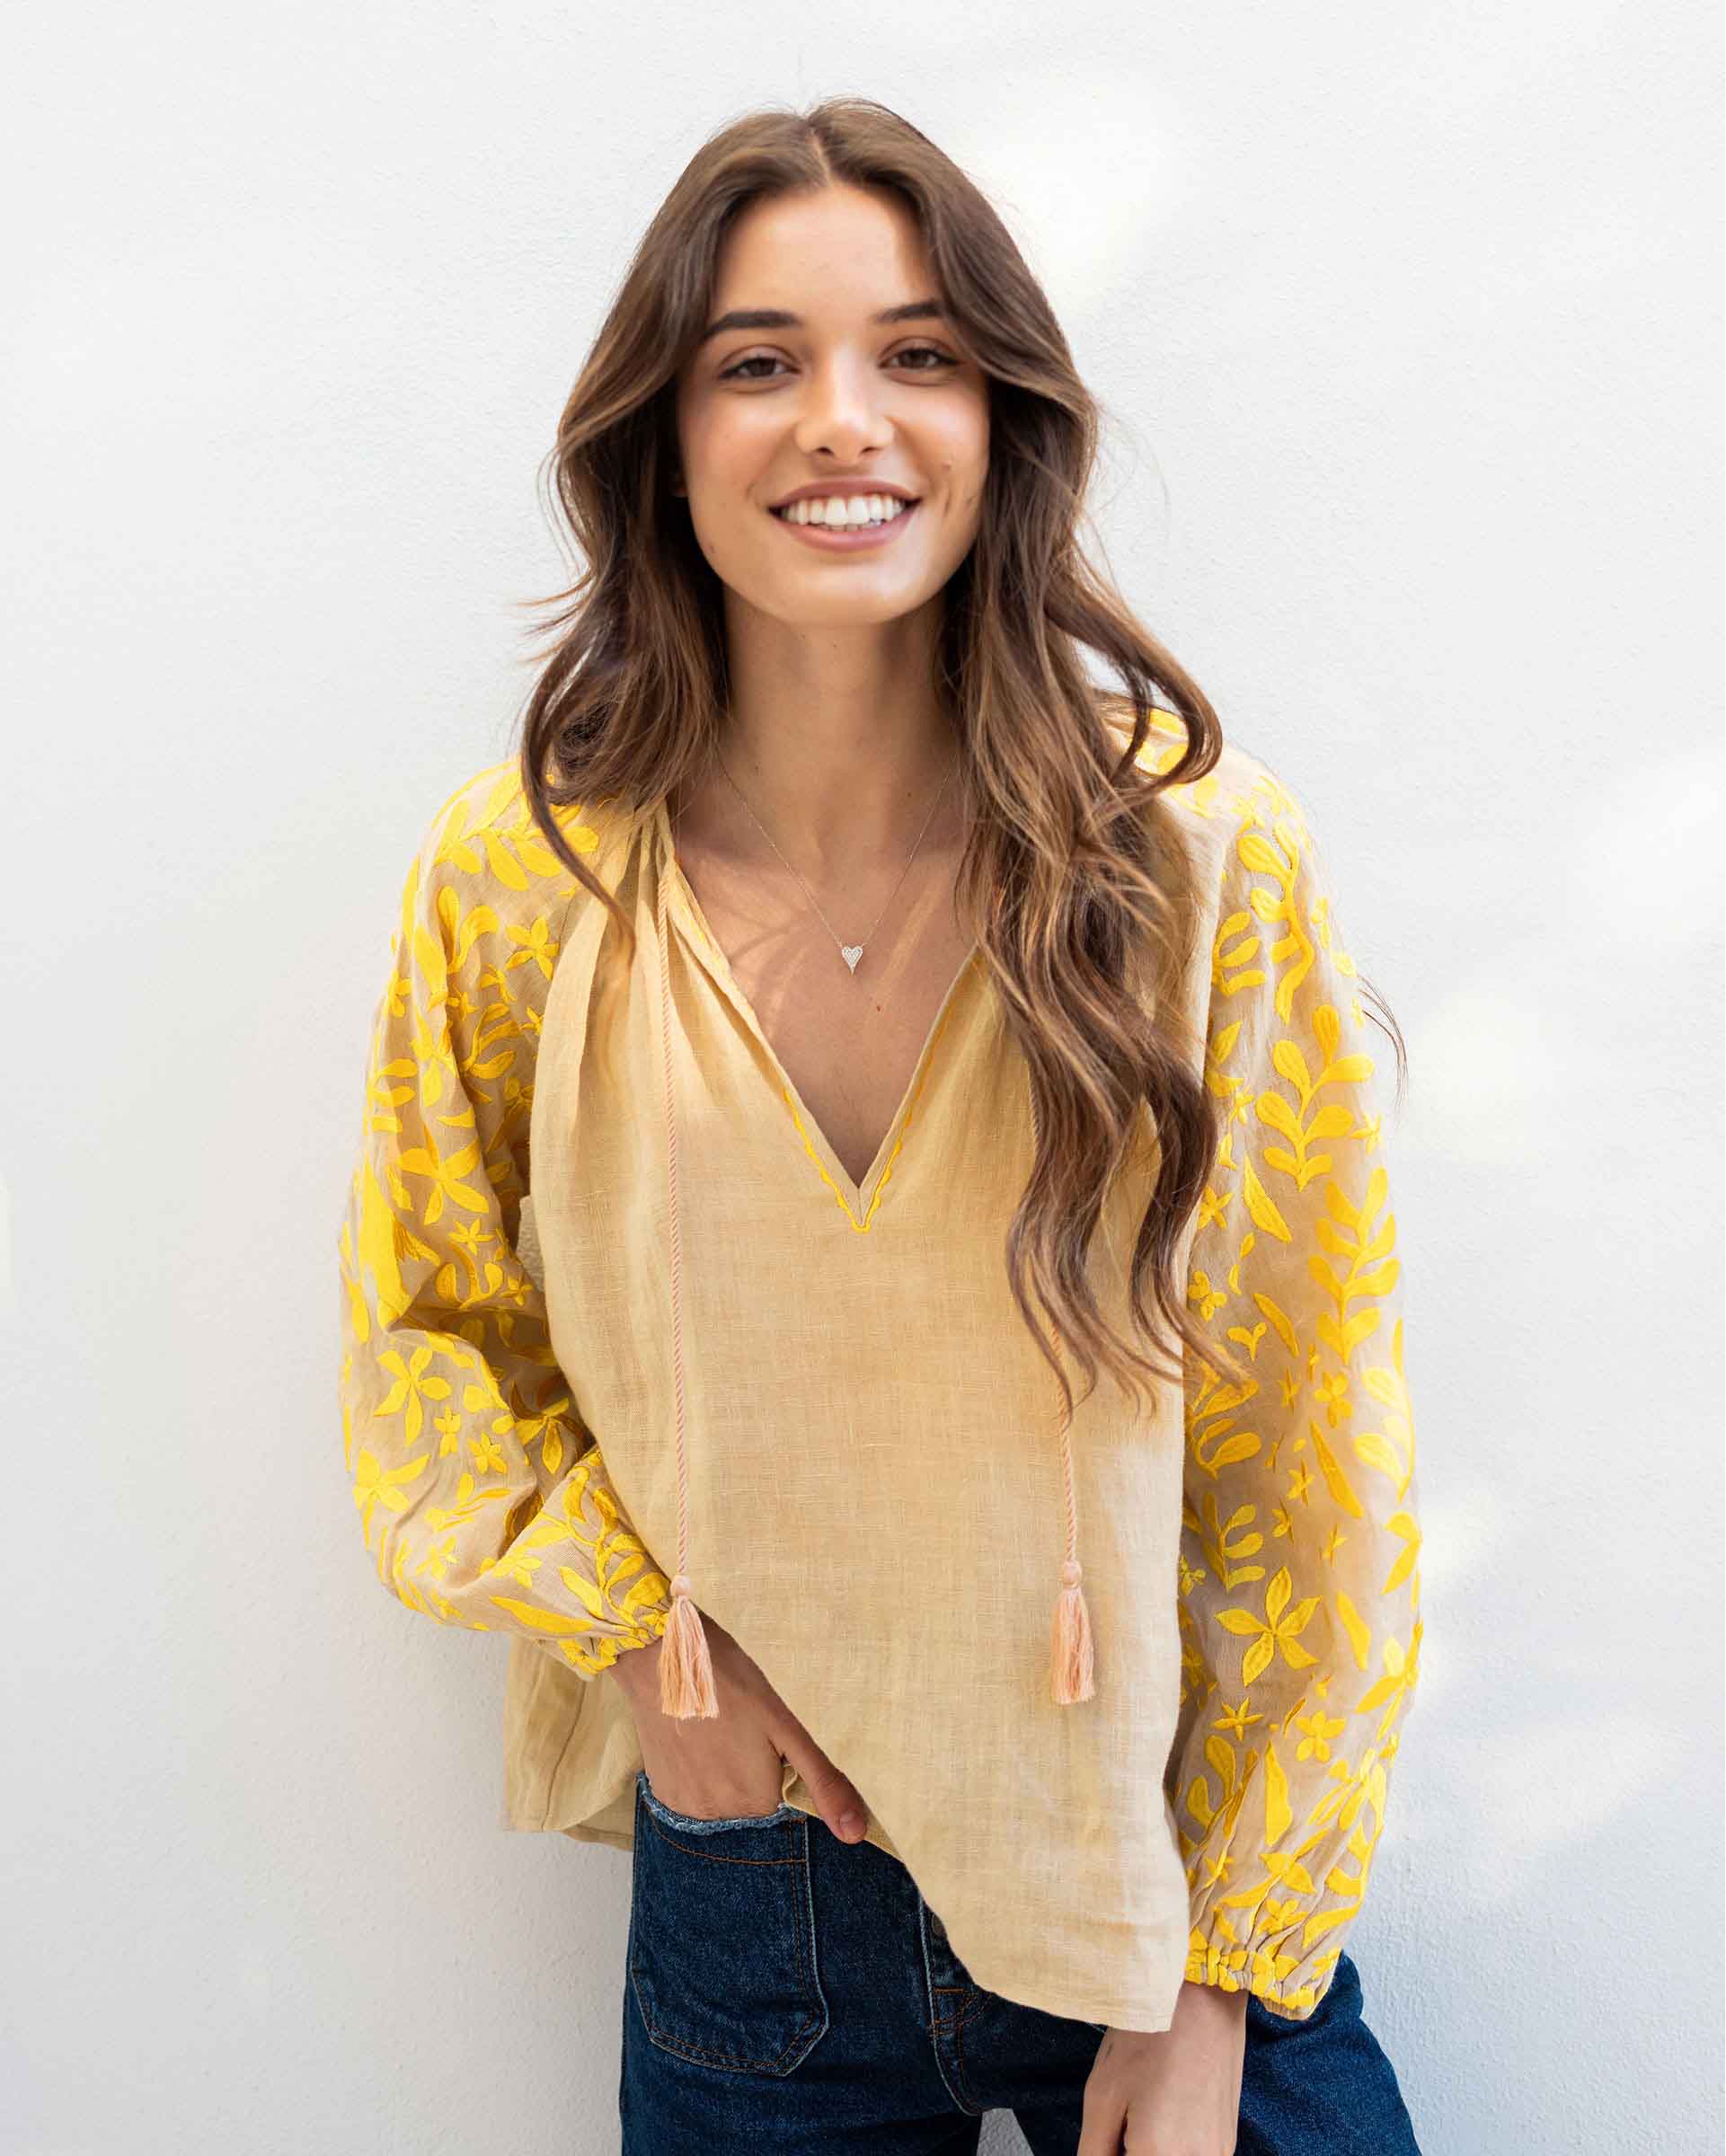 female wearing tan blouse with yellow embroidery on a white background 